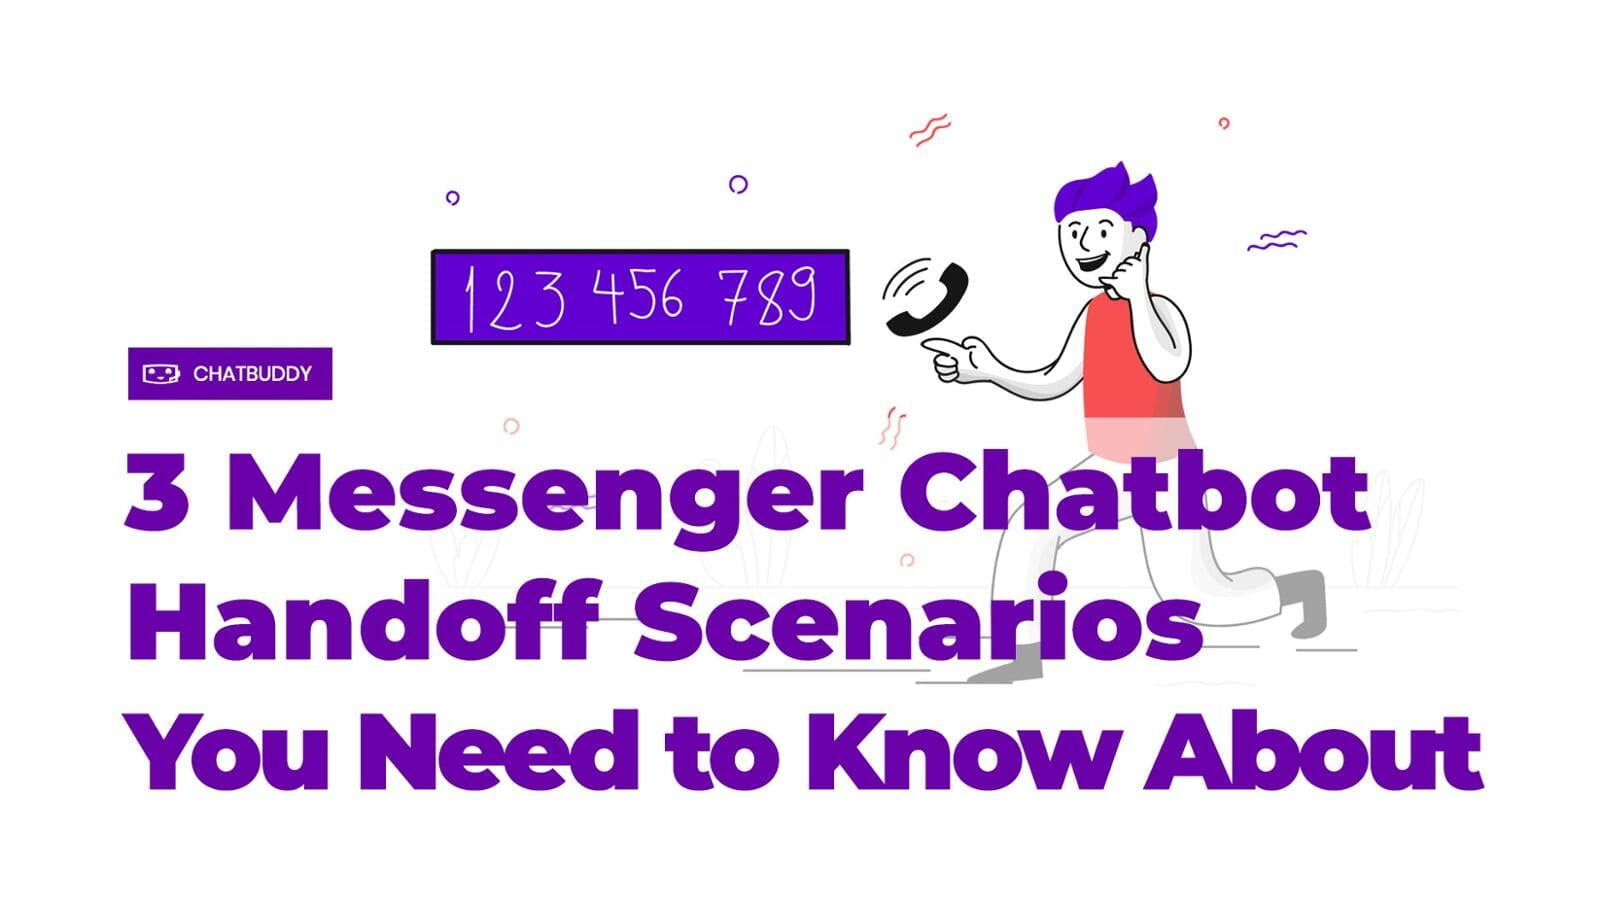 3 Messenger Chatbot Handoff Scenarios You Need to Know About